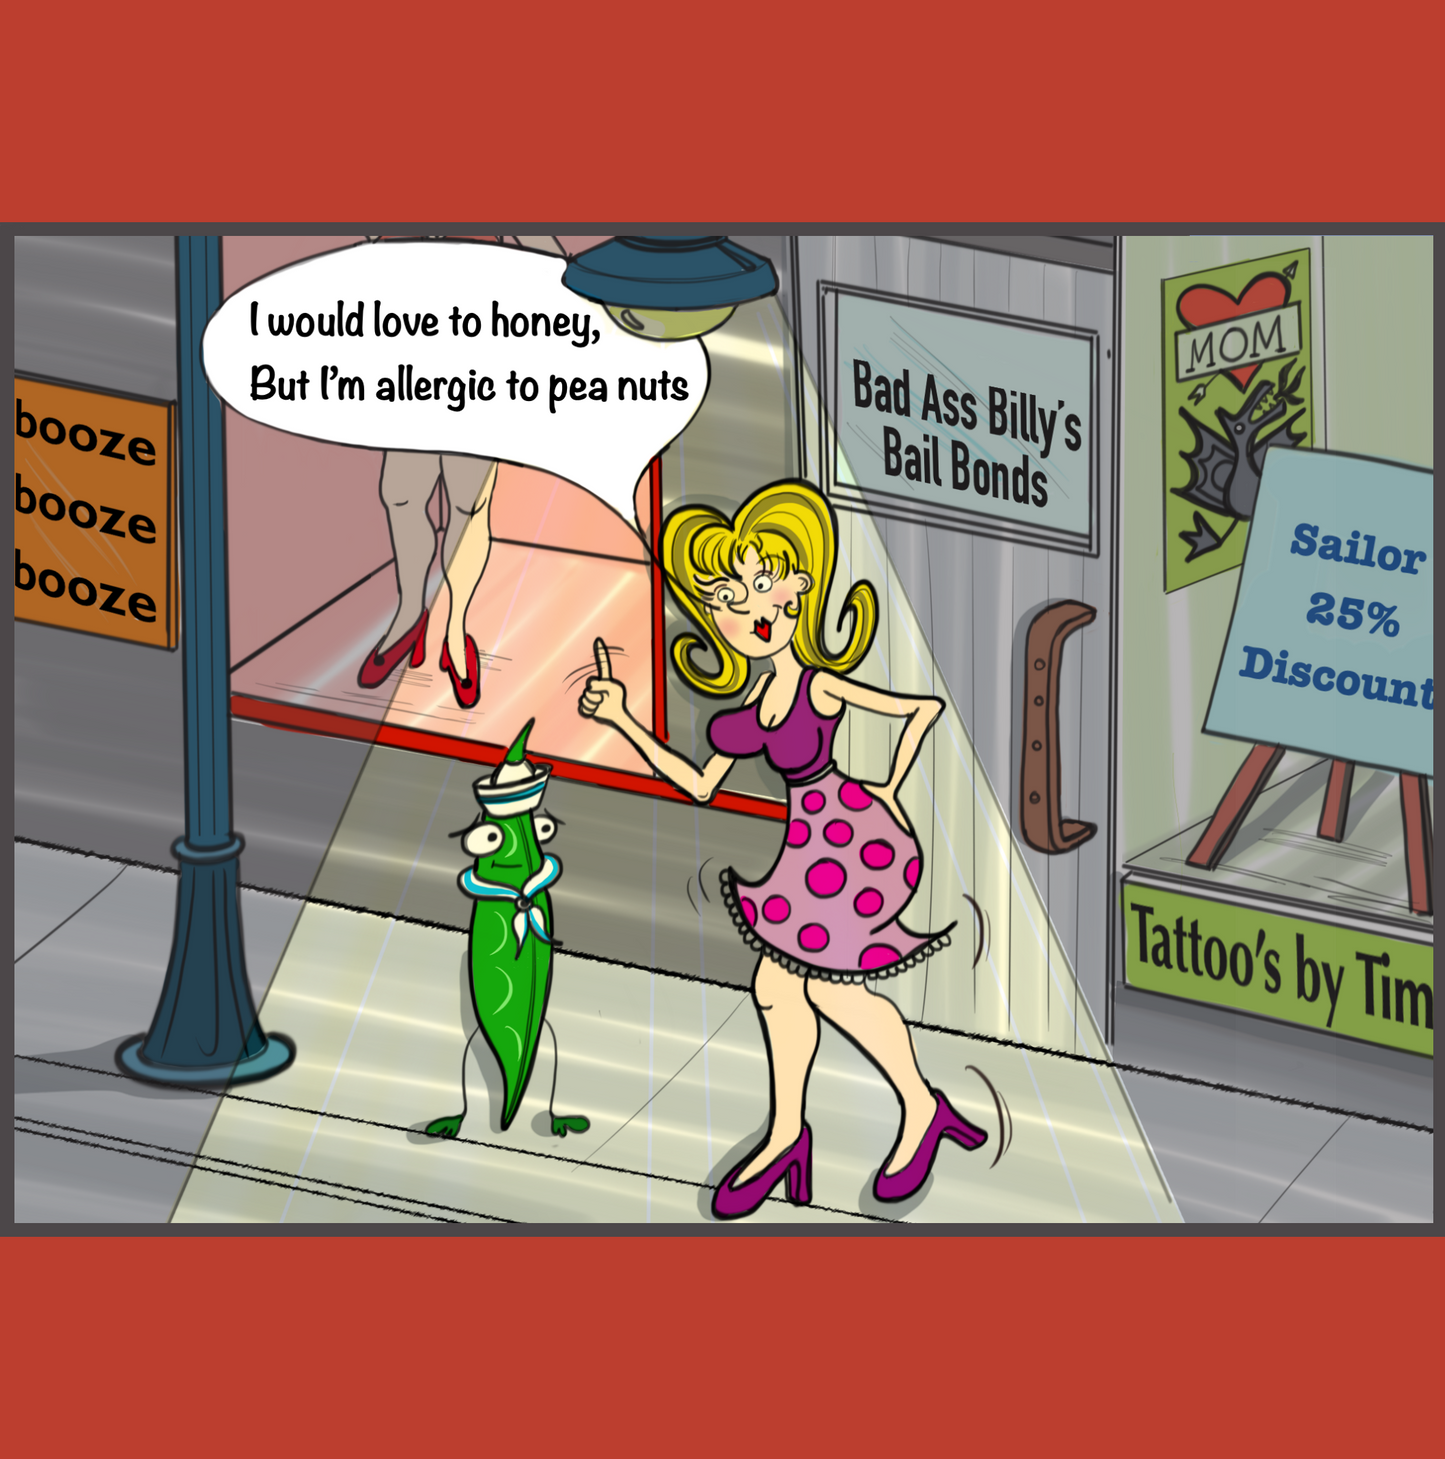 A prostitute in a tight fitting dress is standing on a sidwalk under a streetlight in the bad part of town. There is a tatoo parlor and a bail bondsman shop in the background. A pea pod wearing naval uniform is standing beside the lady looking intently at her. The lady says, "I would love to honey but I'm allergic to pea nuts". 